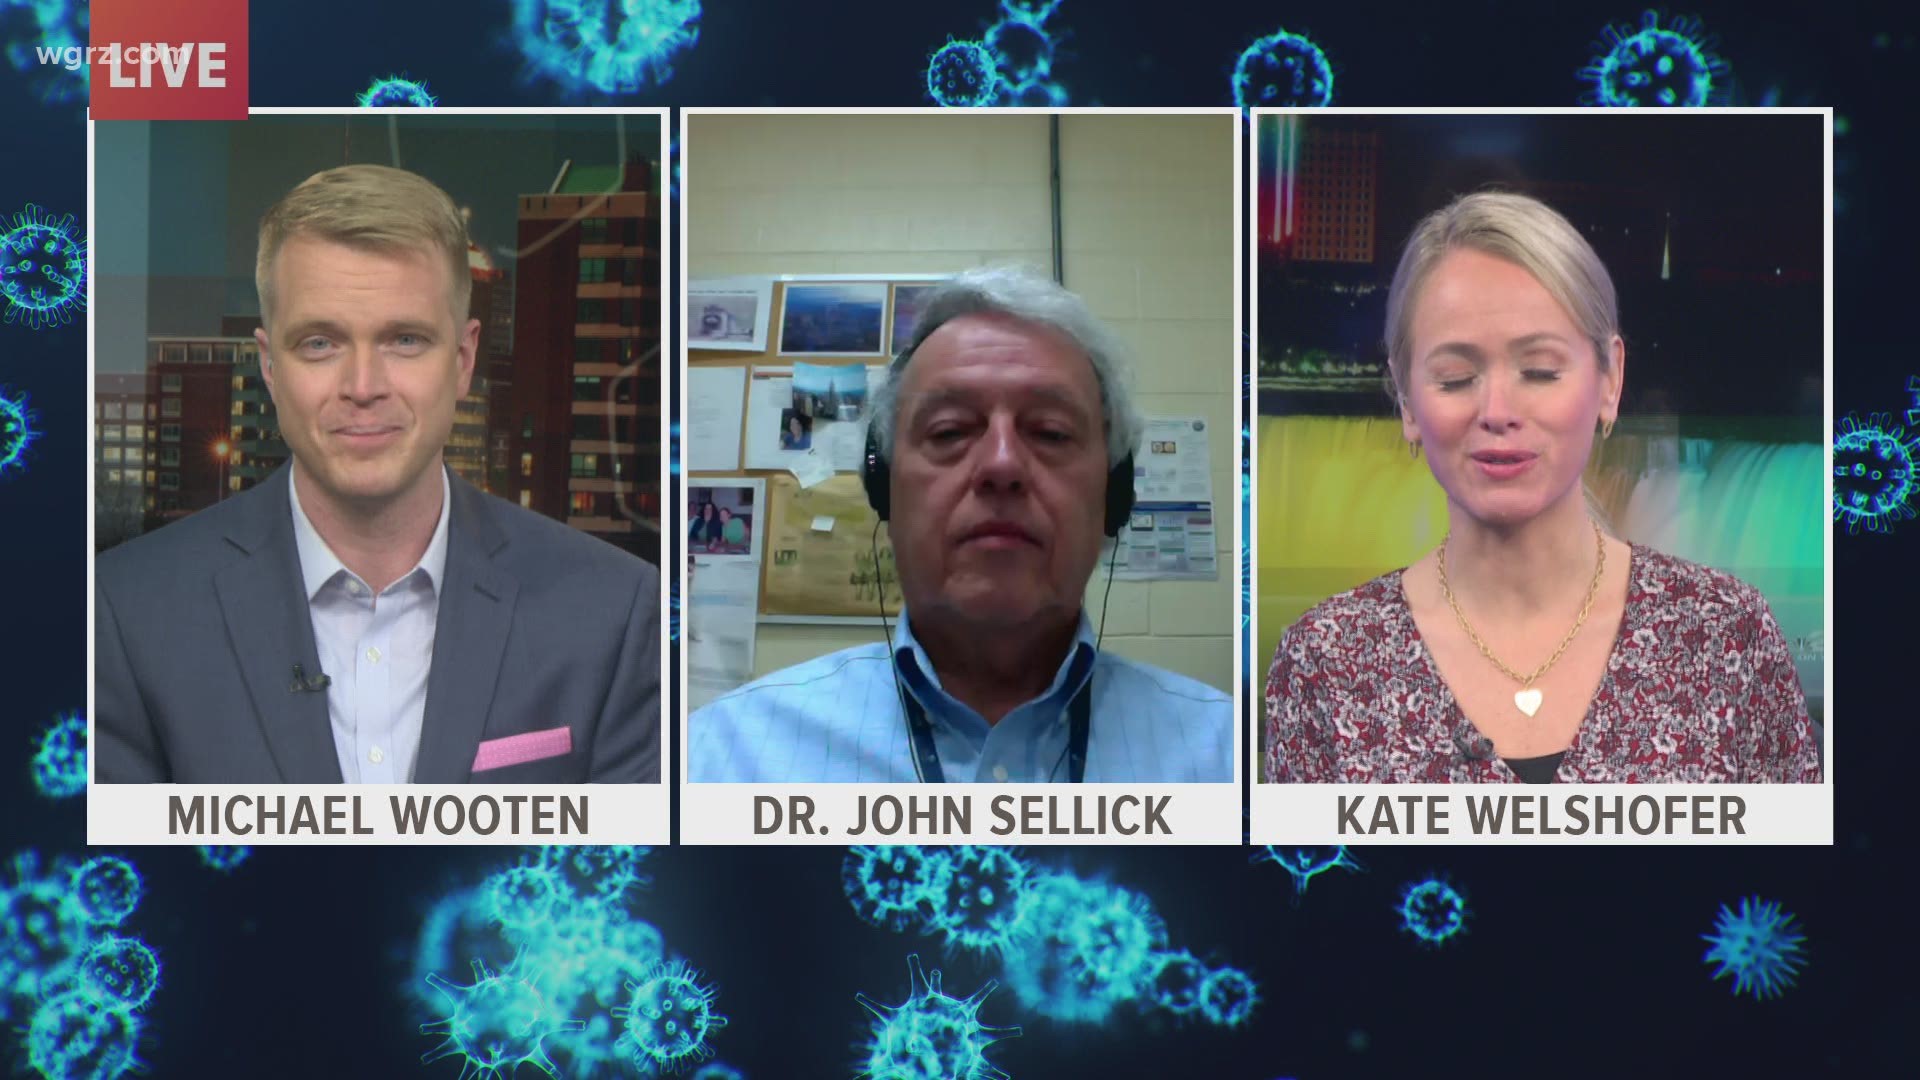 Doctor John Sellick, an epidemiologist at Kaleida Health joins our town hall to discuss the vaccine.